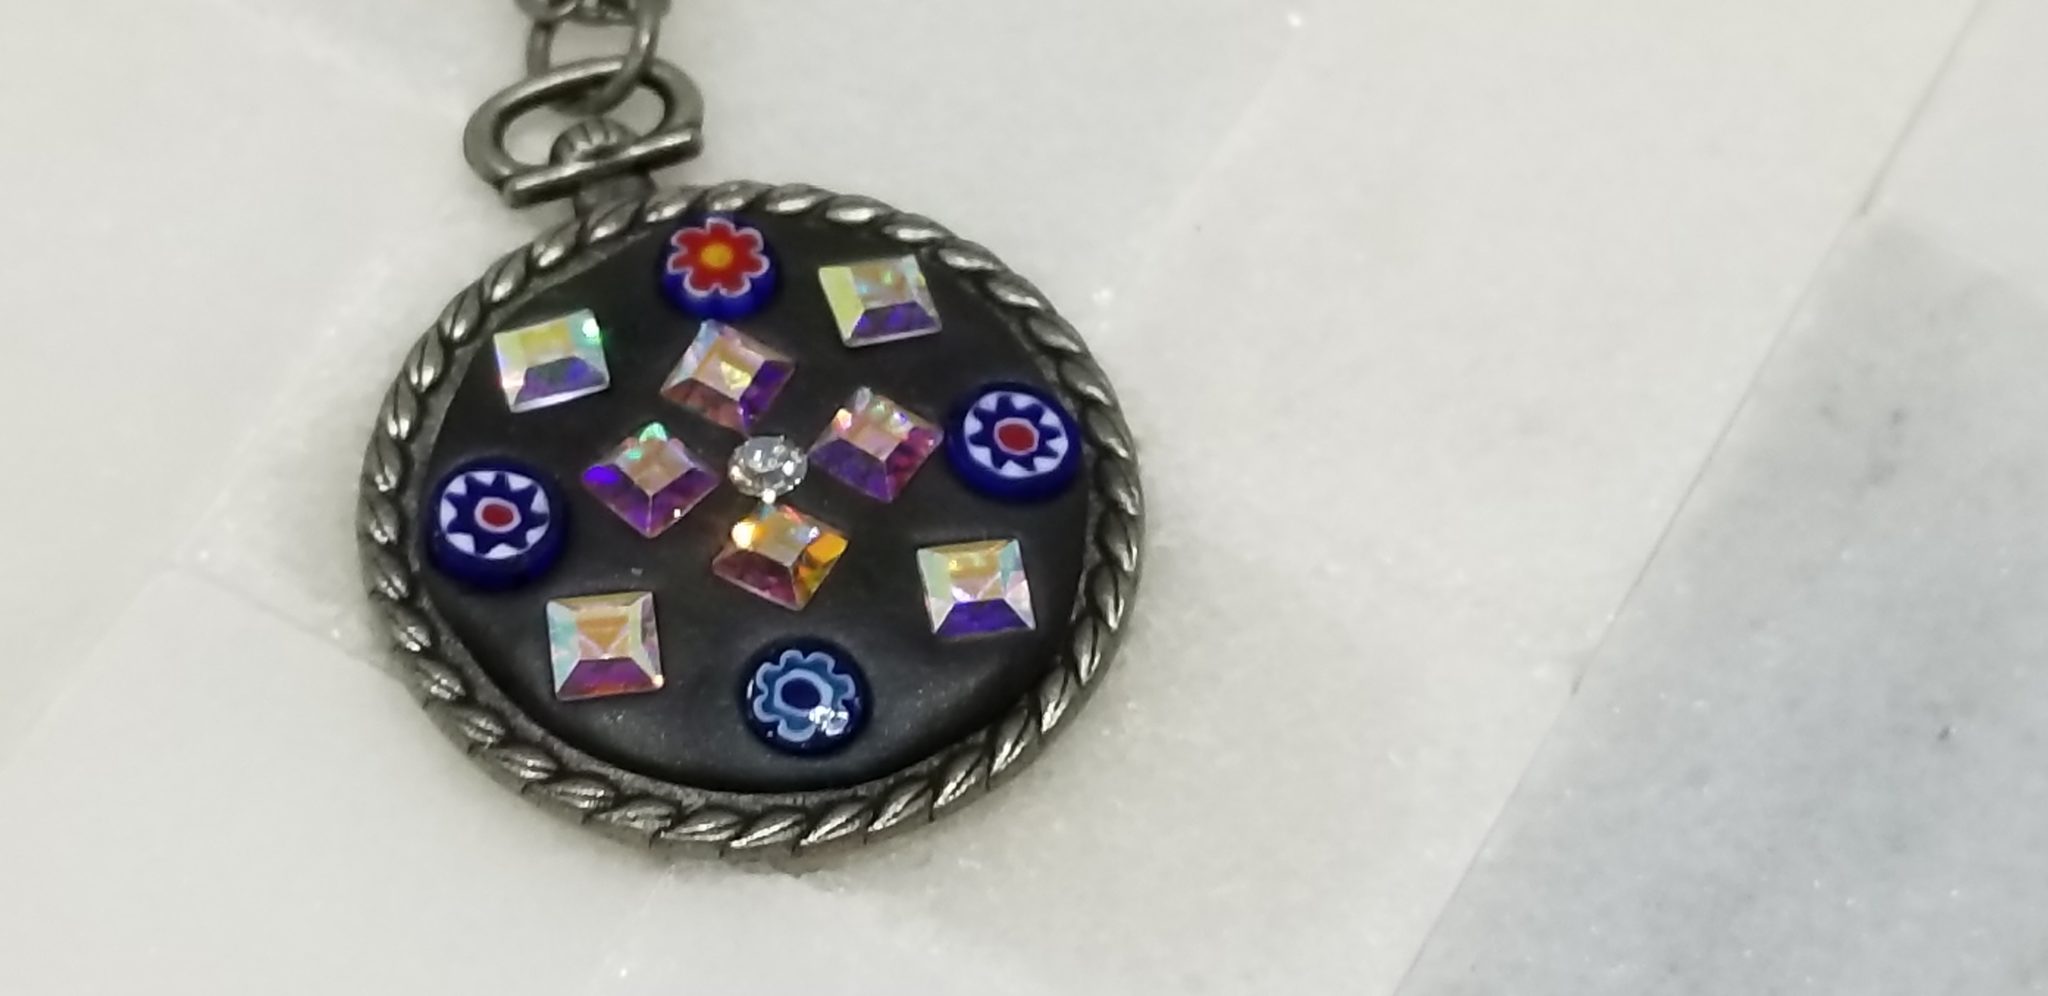 Selfcare with making your own jewelery